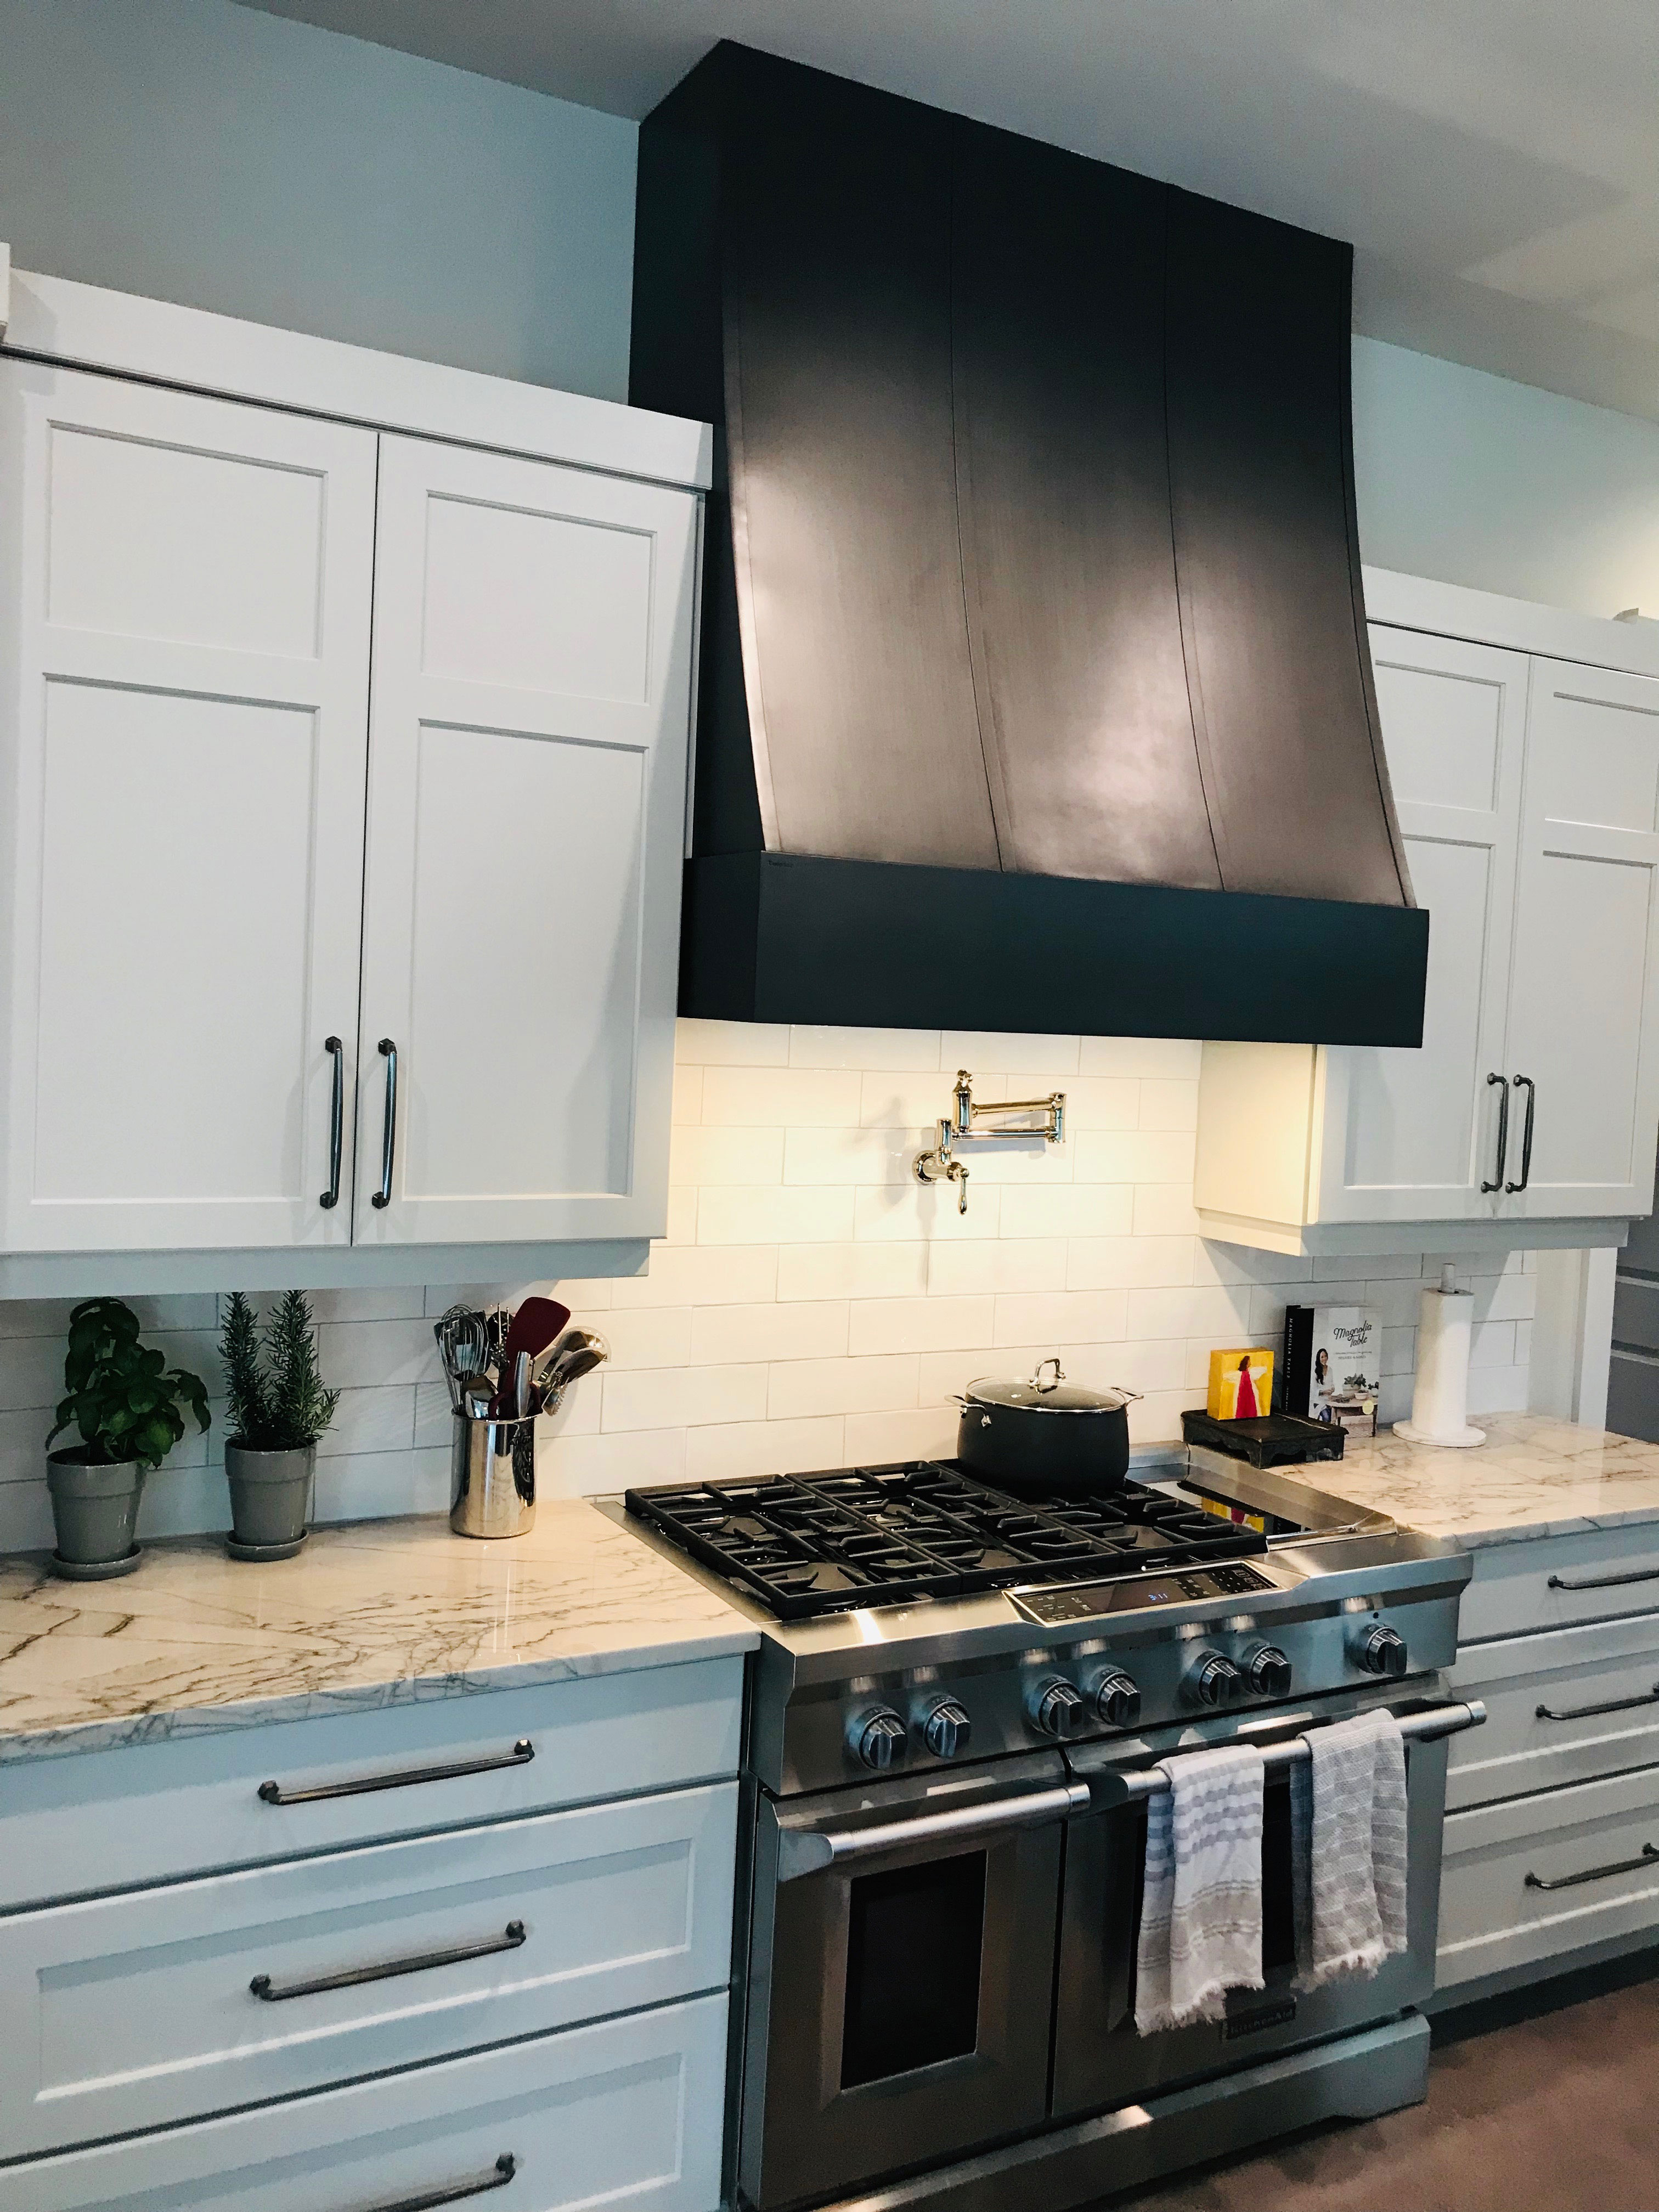 Fabulous contemporary kitchen remodel with white kitchen cabinets, marble countertops, sleek range hood, accentuated by a striking brick backsplash